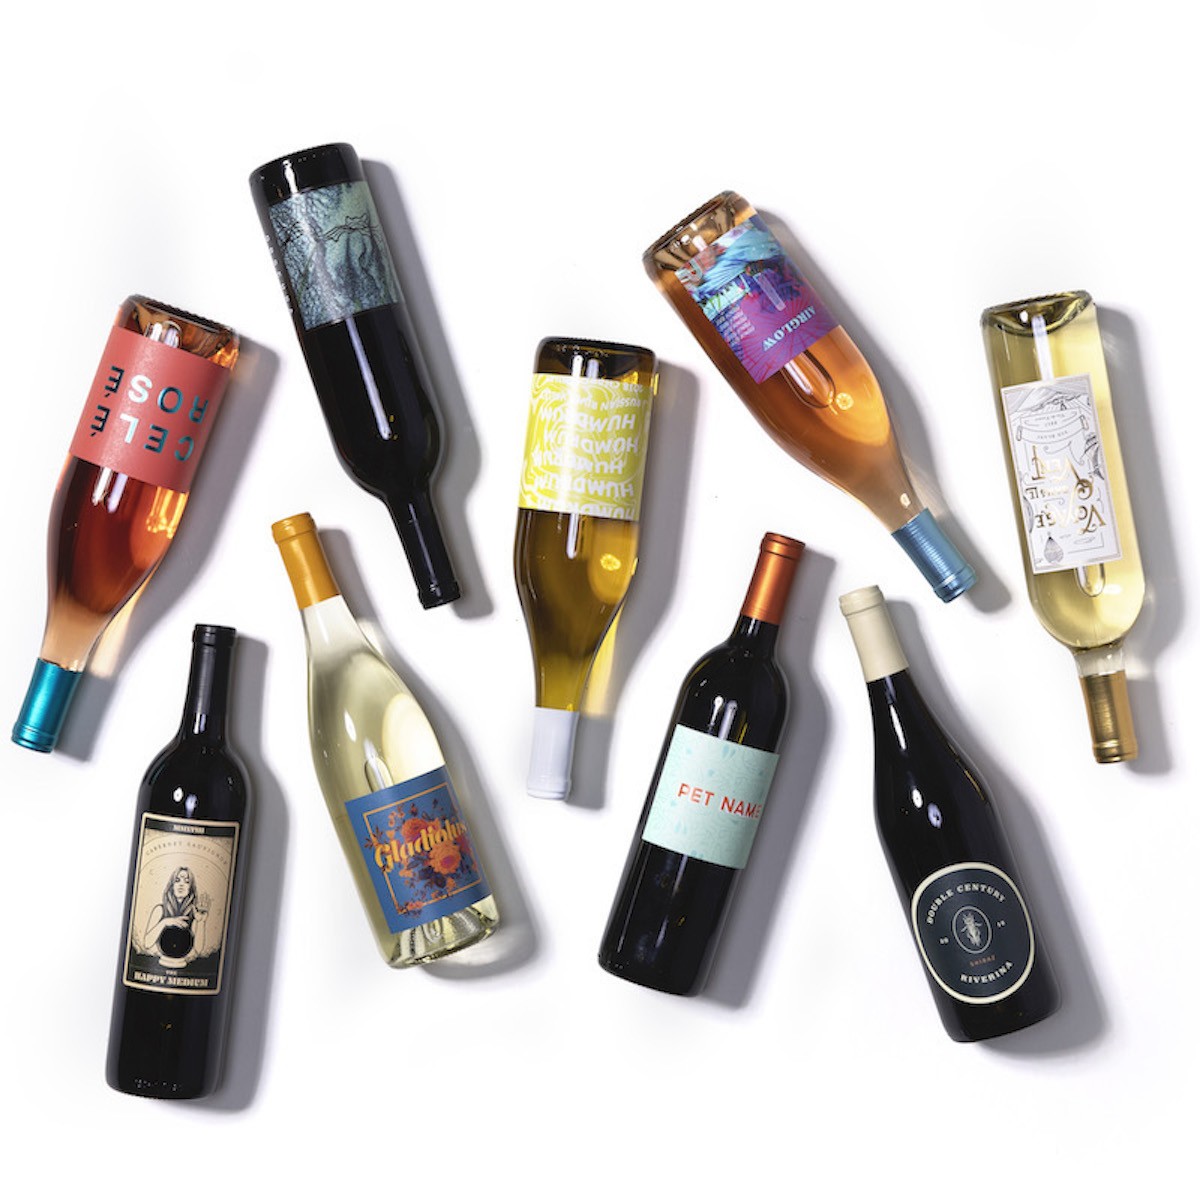 Wine trivia: Assorted Bright Cellars wines shown on wine background